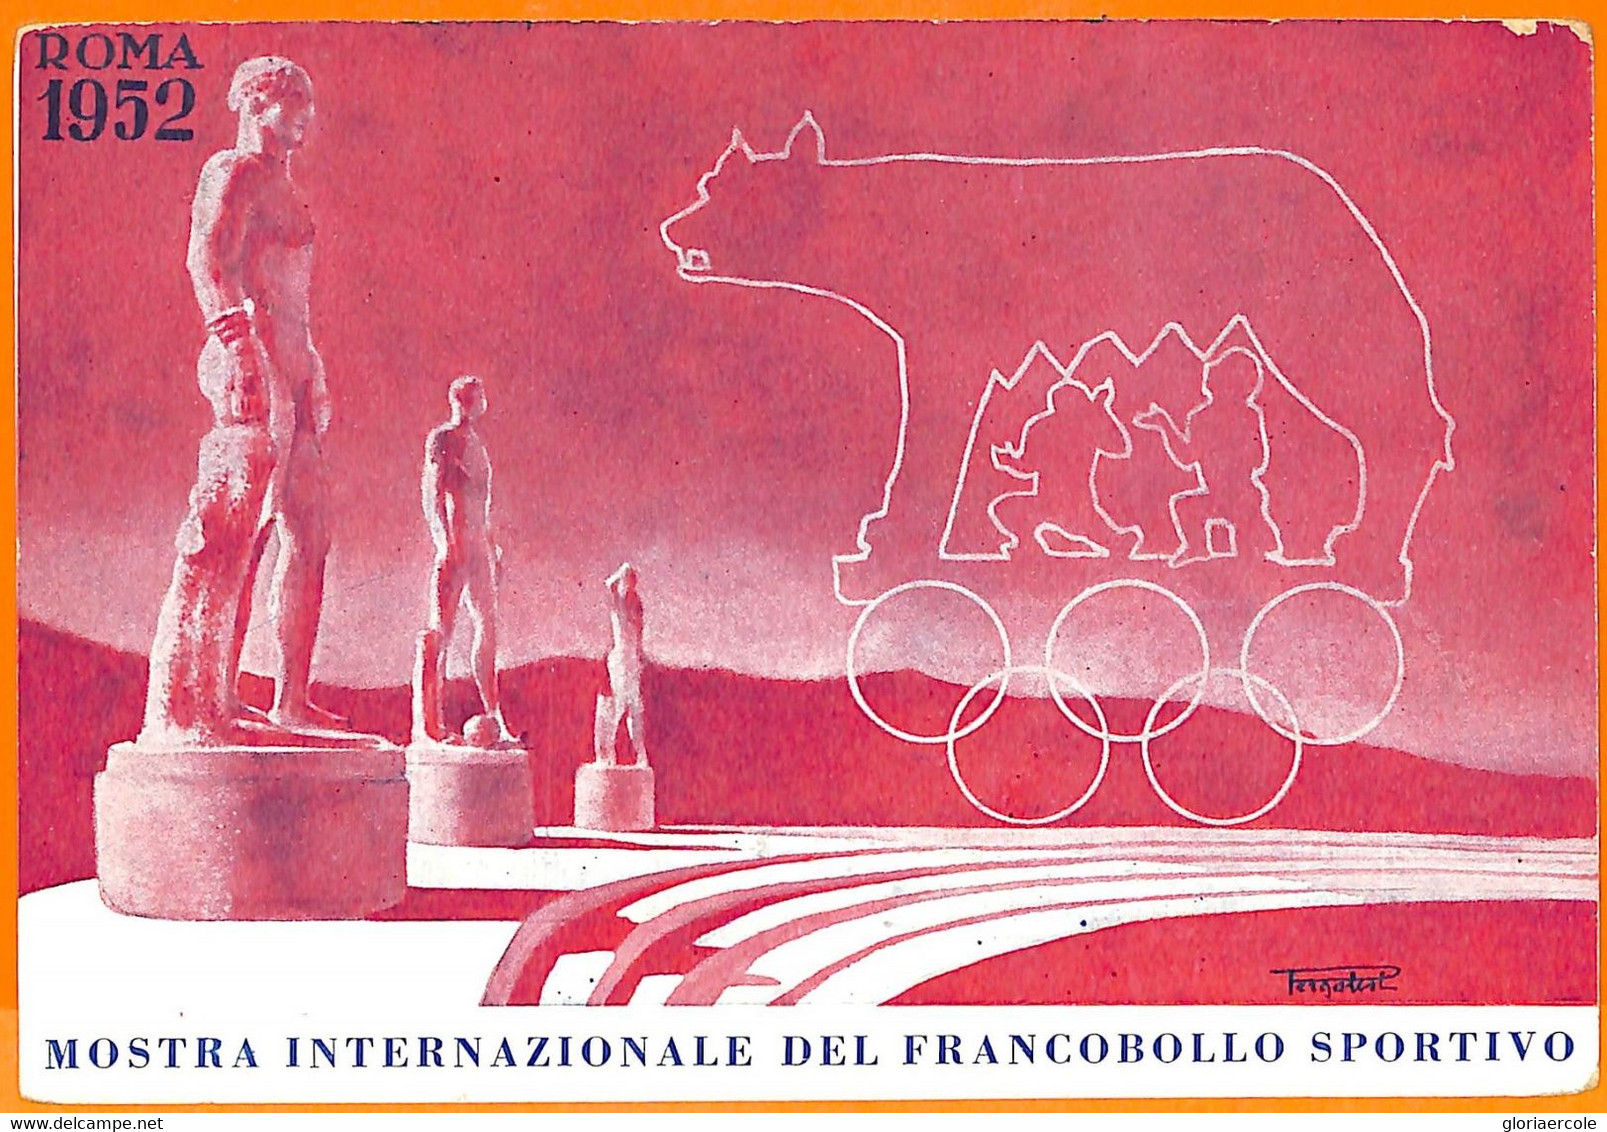 Aa2847 - Postal History - VINTAGE Illustrated CARD - 1952  Olympic Games ITALY - Sommer 1952: Helsinki